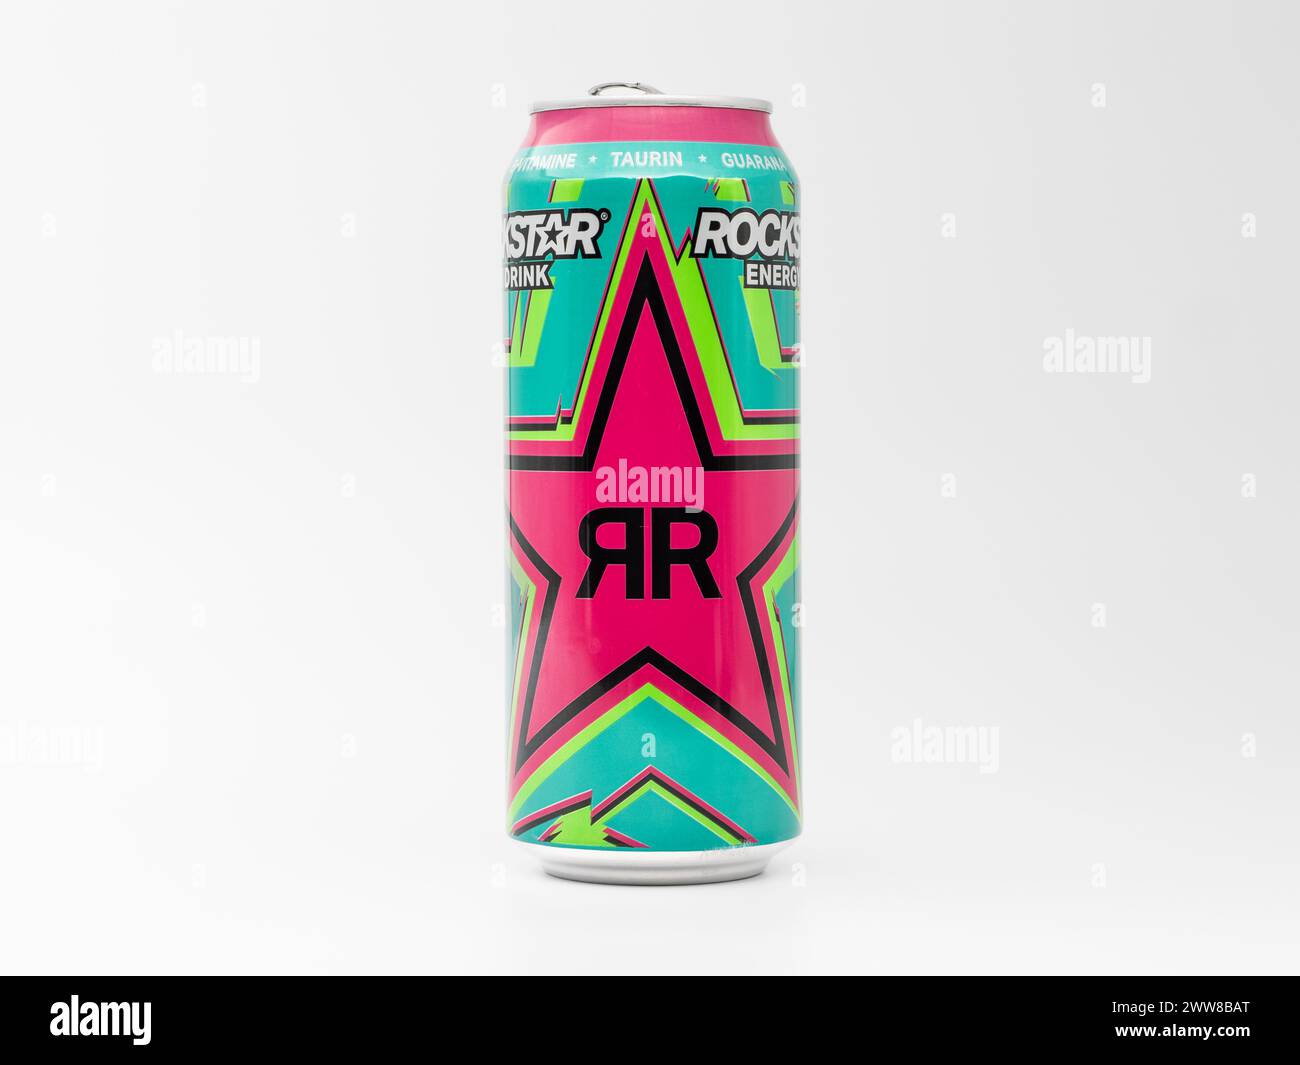 Rockstar Energy Drink Sour Apple Punched flavor beverage. The shiny green can with the vibrant magenta colored star logo is a popular lifestyle drink. Stock Photo